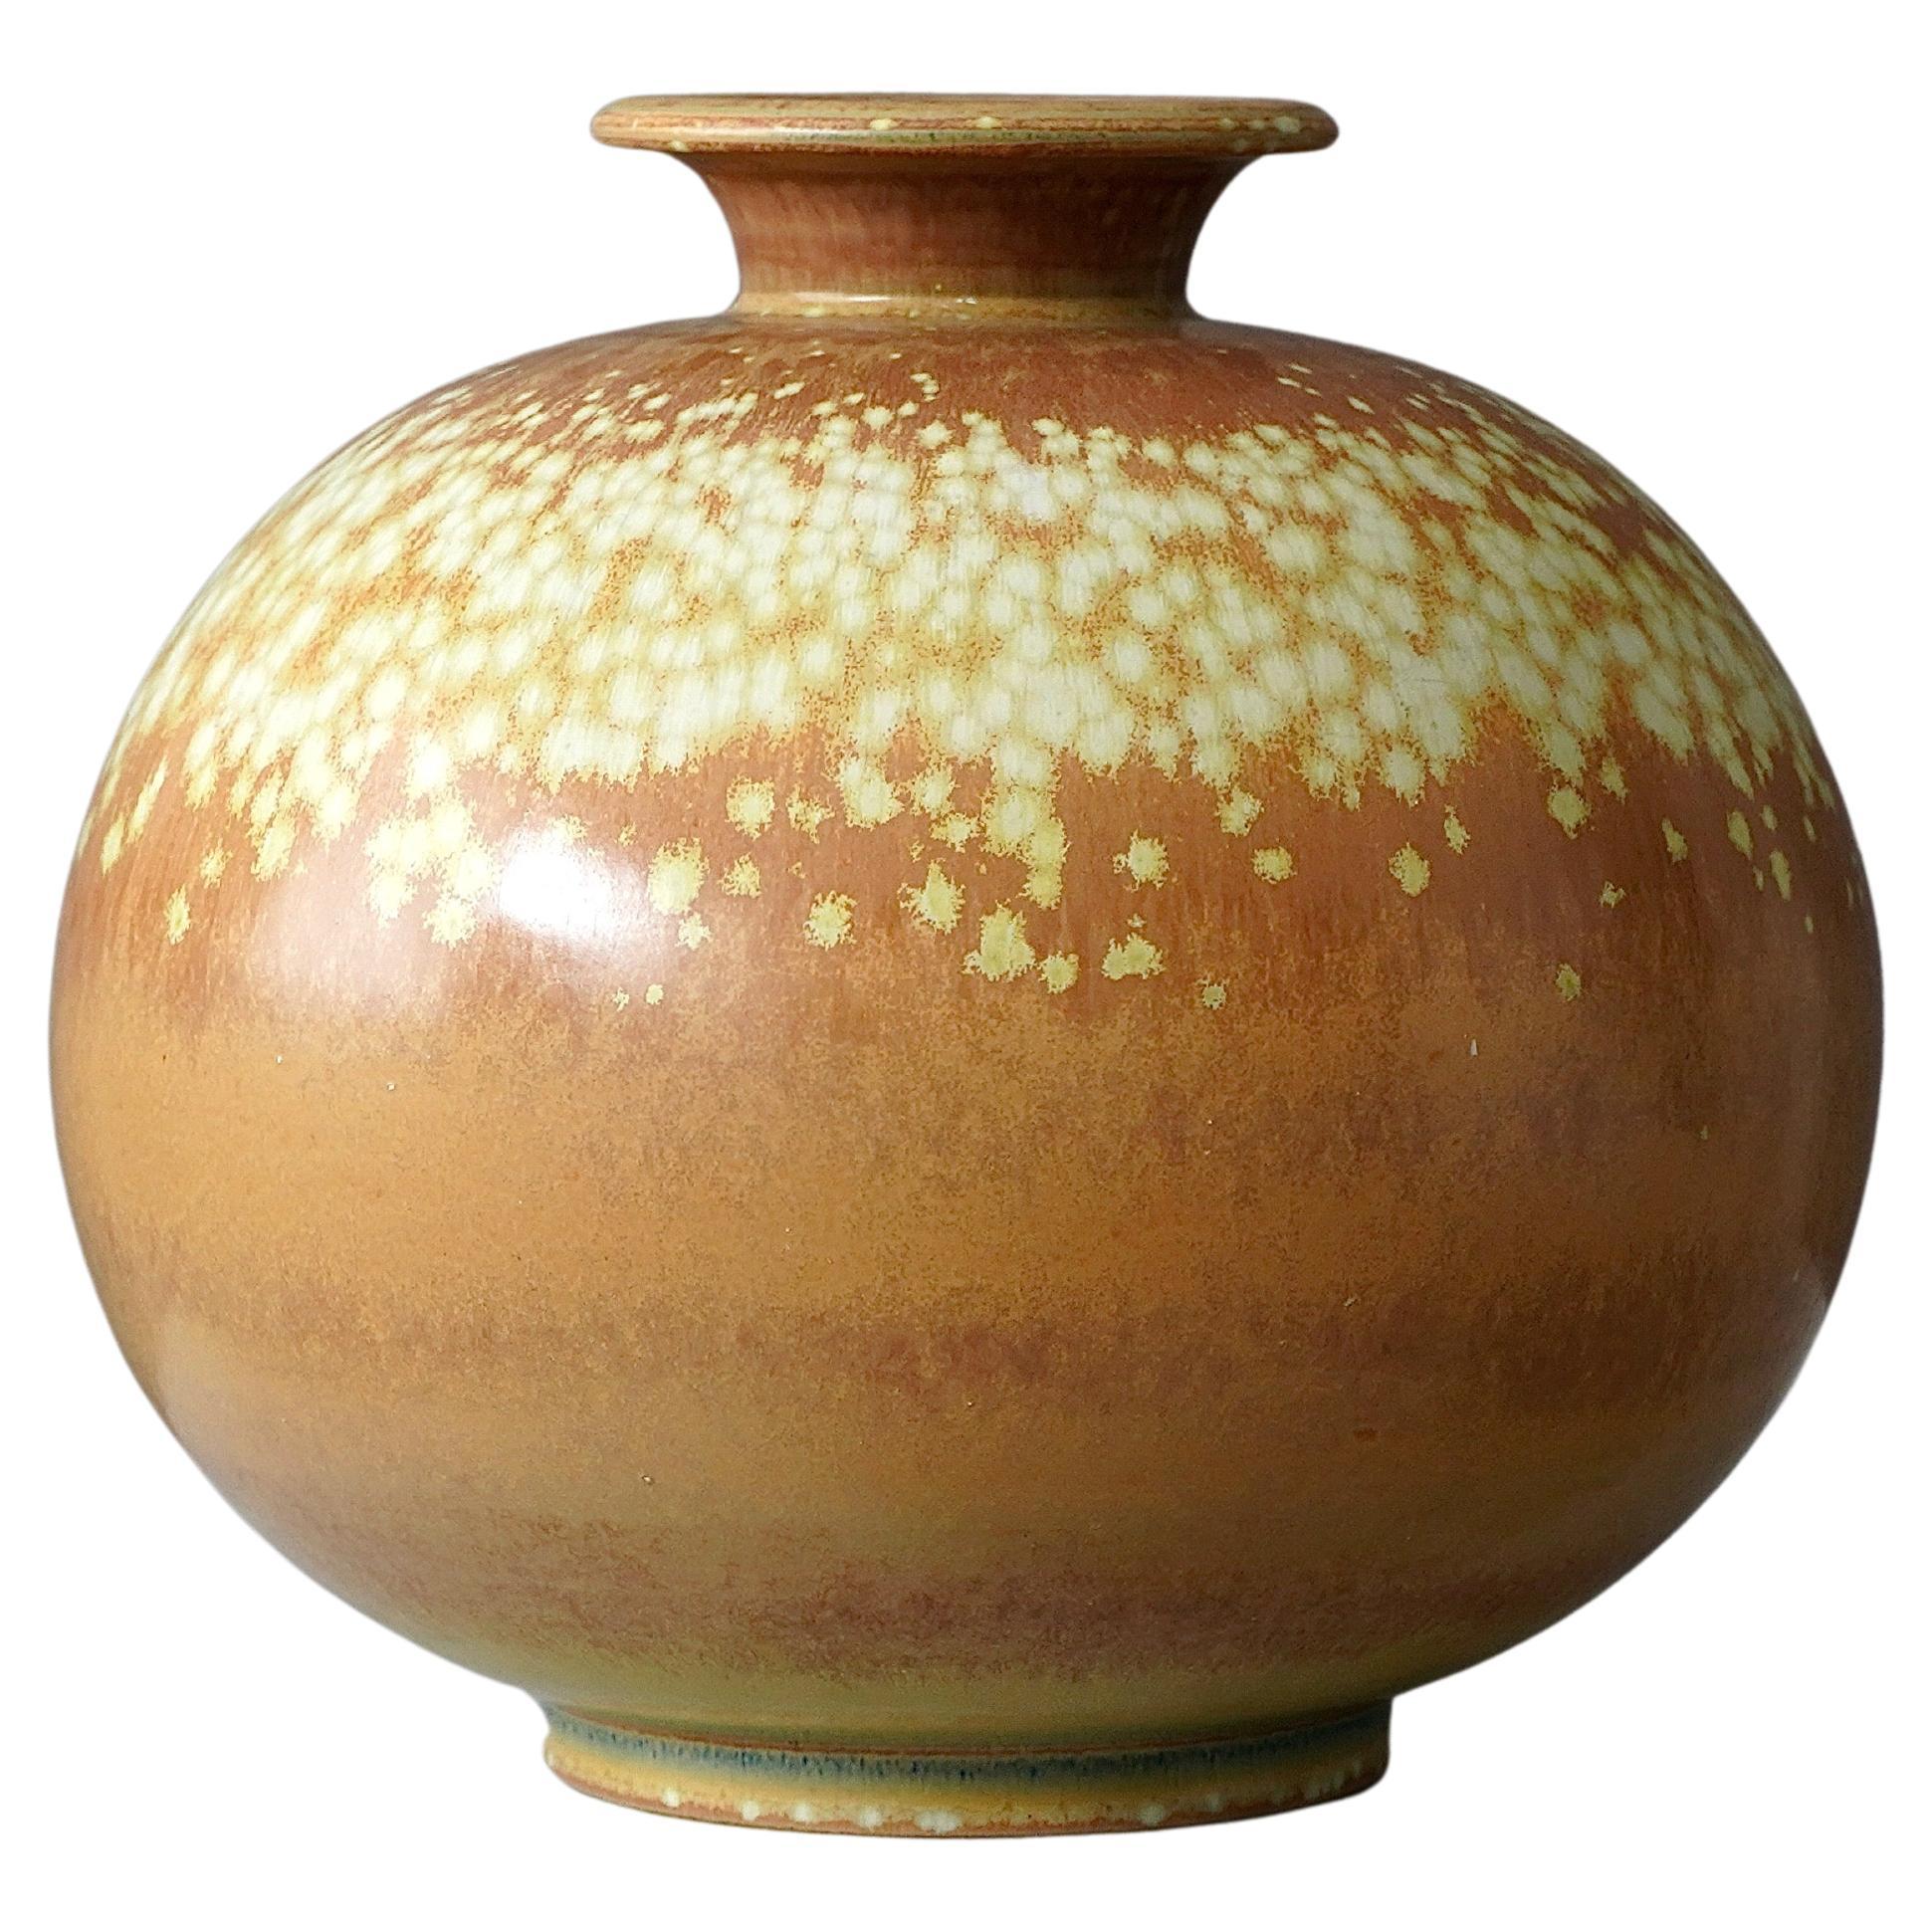 Unique Large Stoneware Vase by Gunnar Nylund for Rorstrand, Sweden, 1940s For Sale